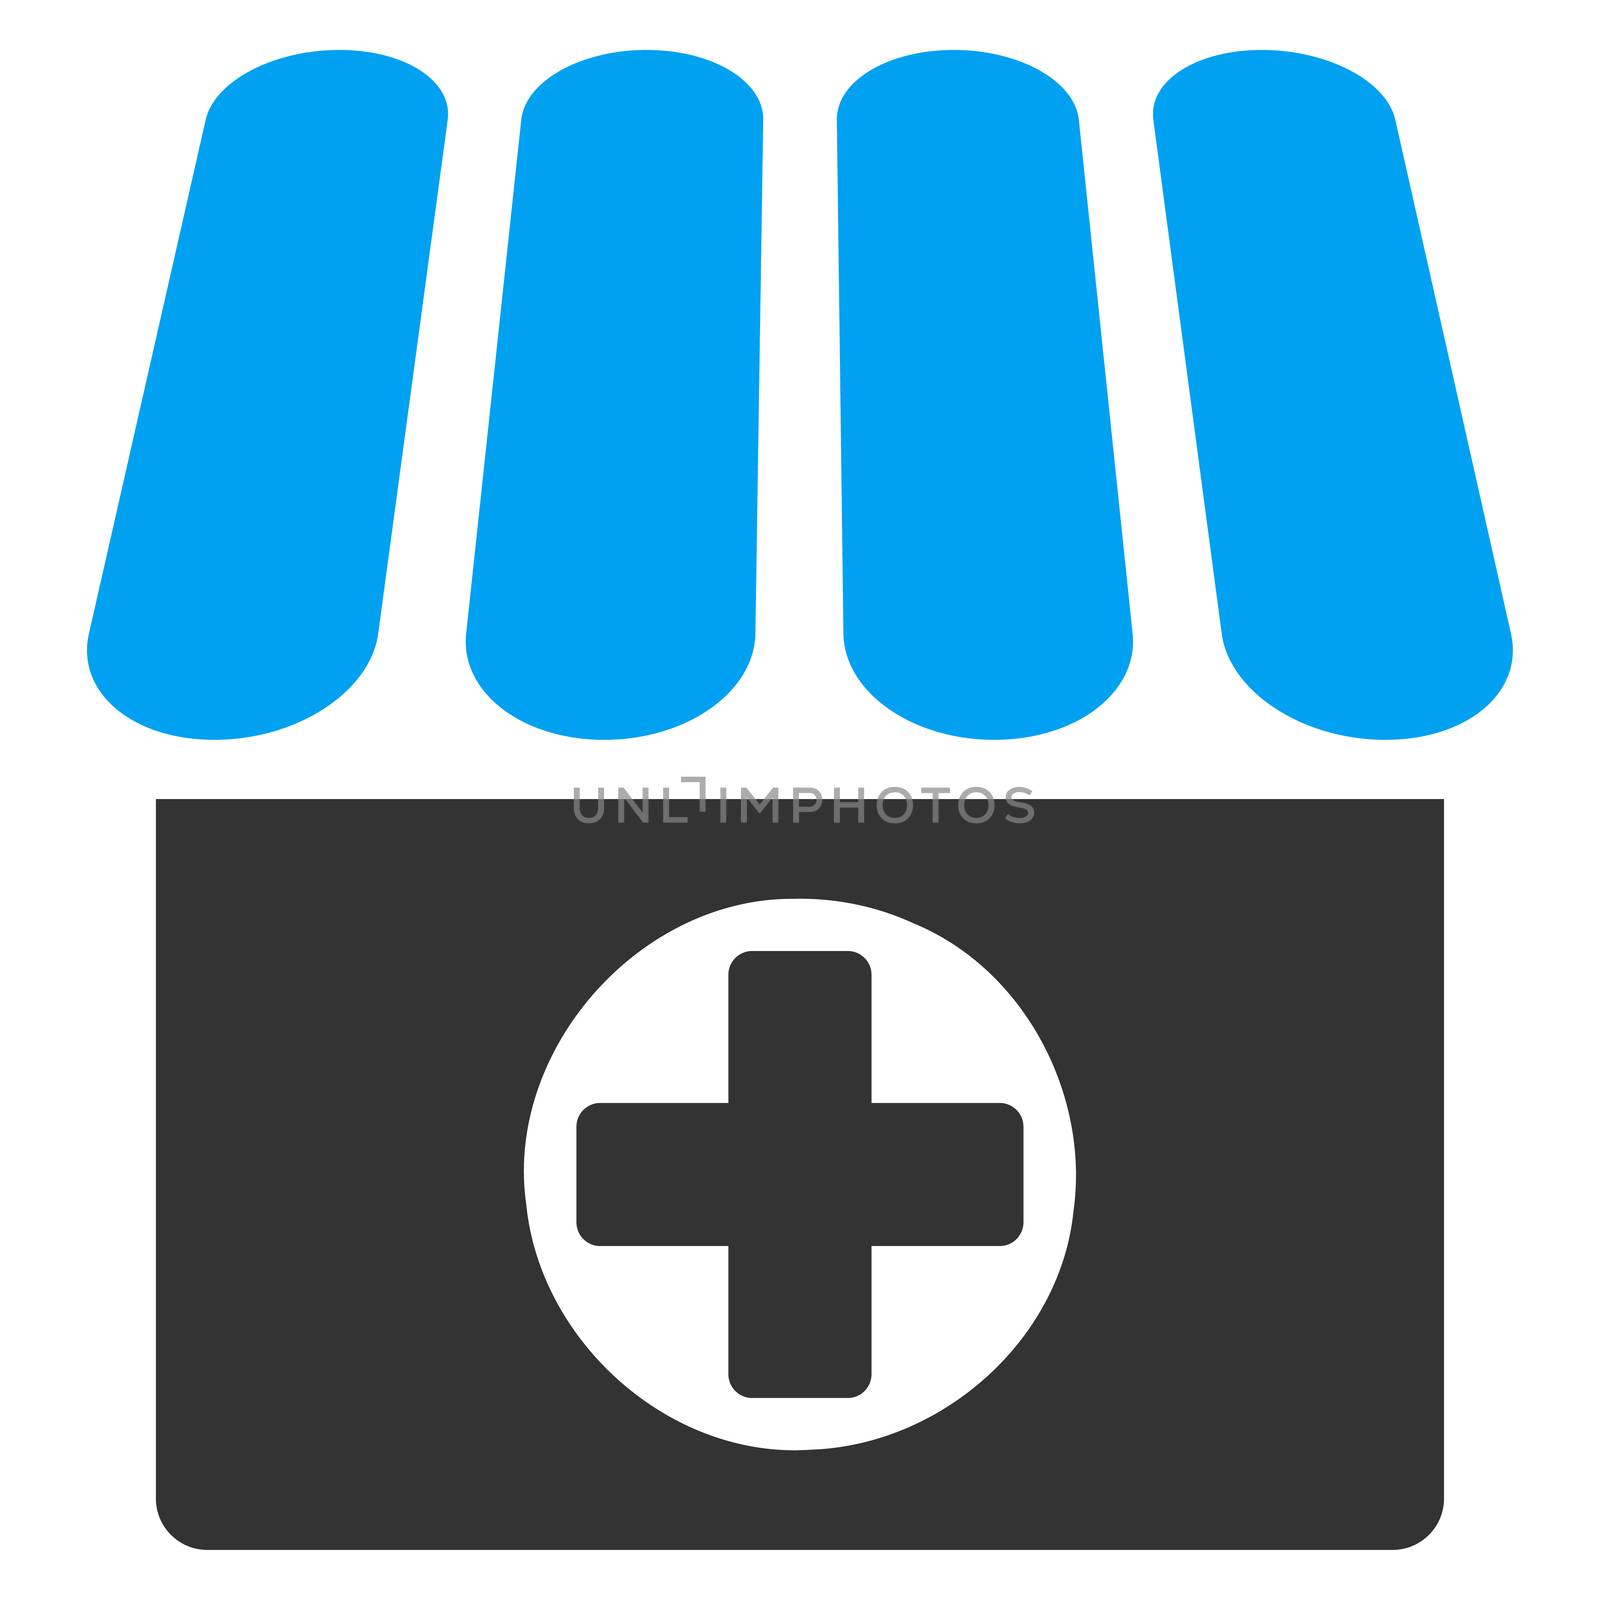 Drugstore icon from Business Bicolor Set. Glyph style is bicolor flat symbol, blue and gray colors, rounded angles, white background.